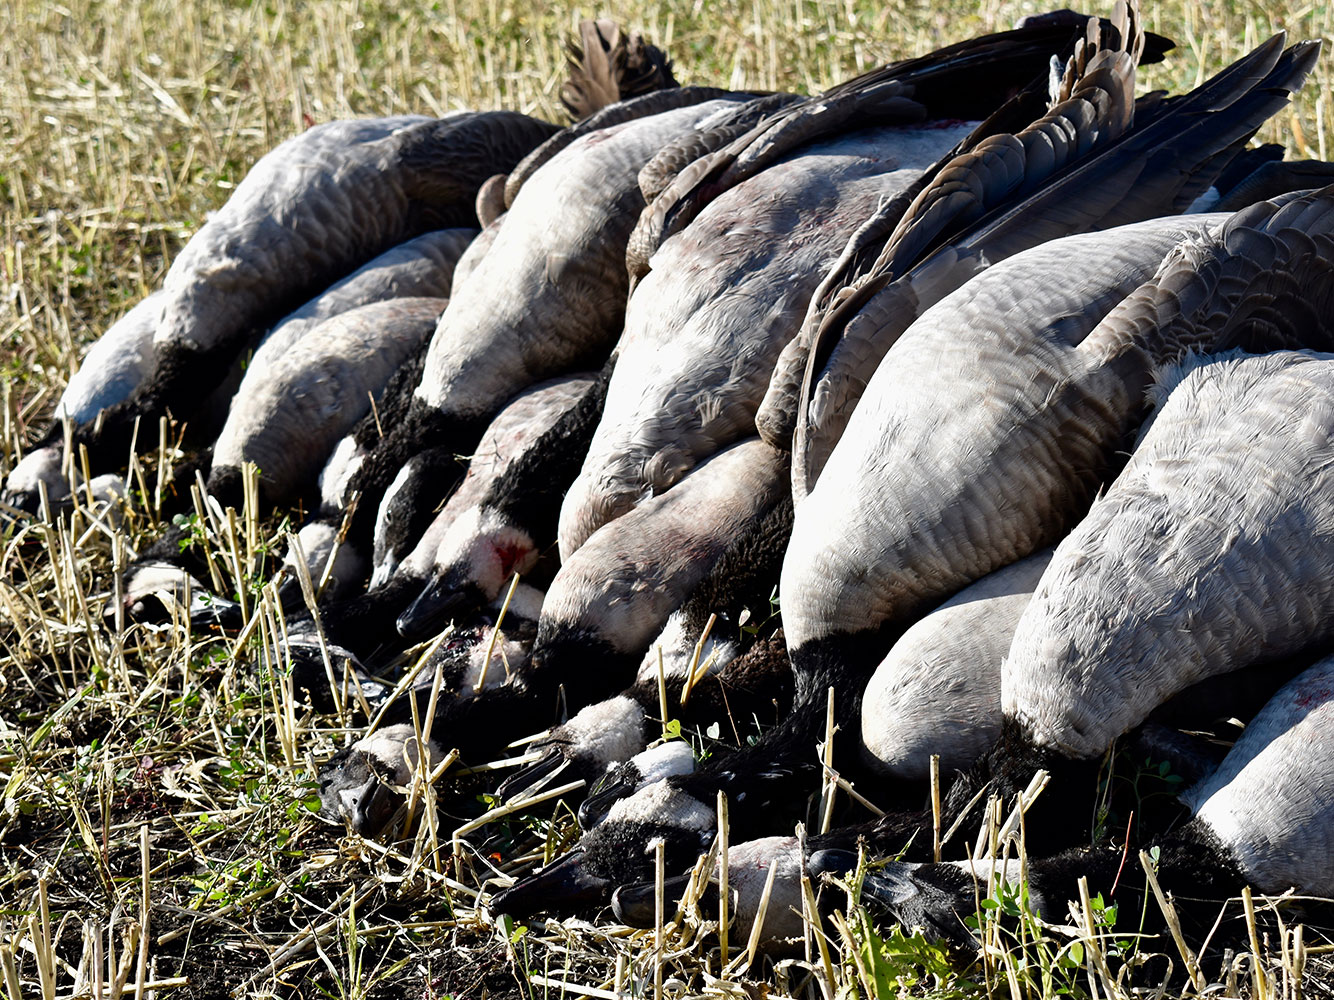 A limit of Canada geese on on the ground.